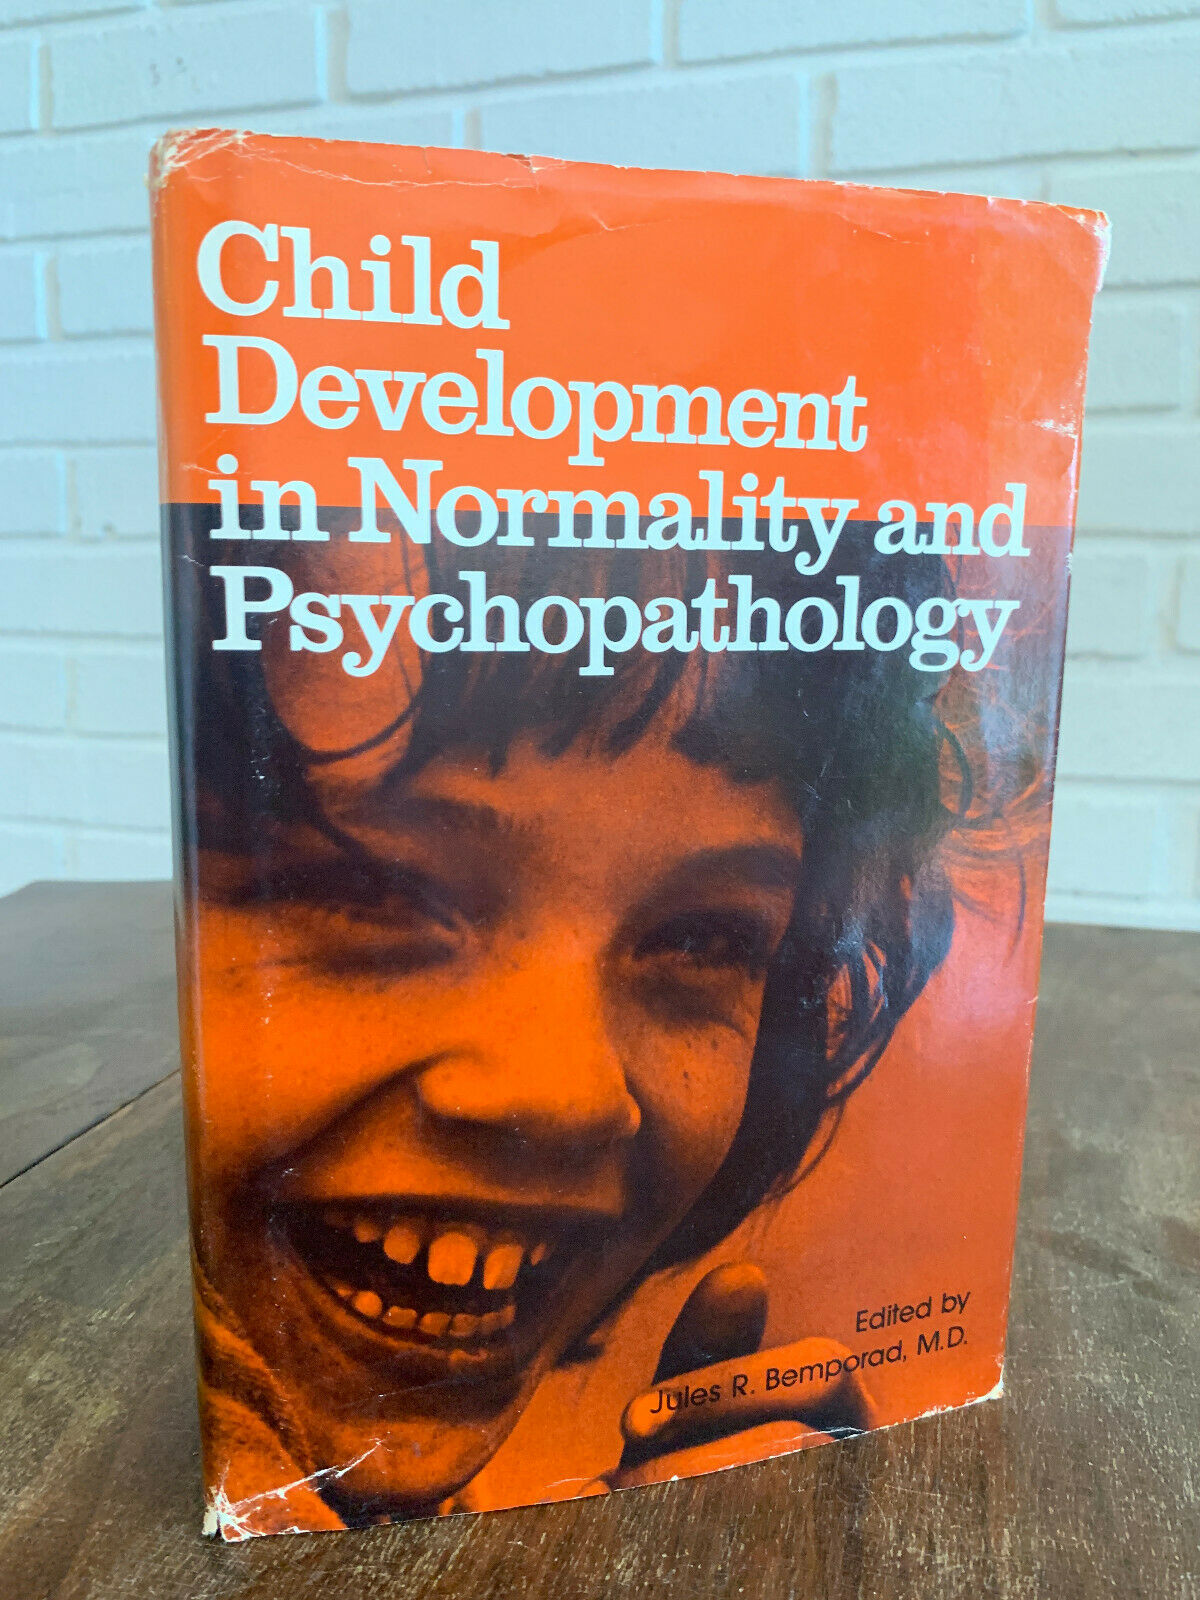 Child Development in Normality and Psychopathology by Jules R. Bemporad 1980 Z1